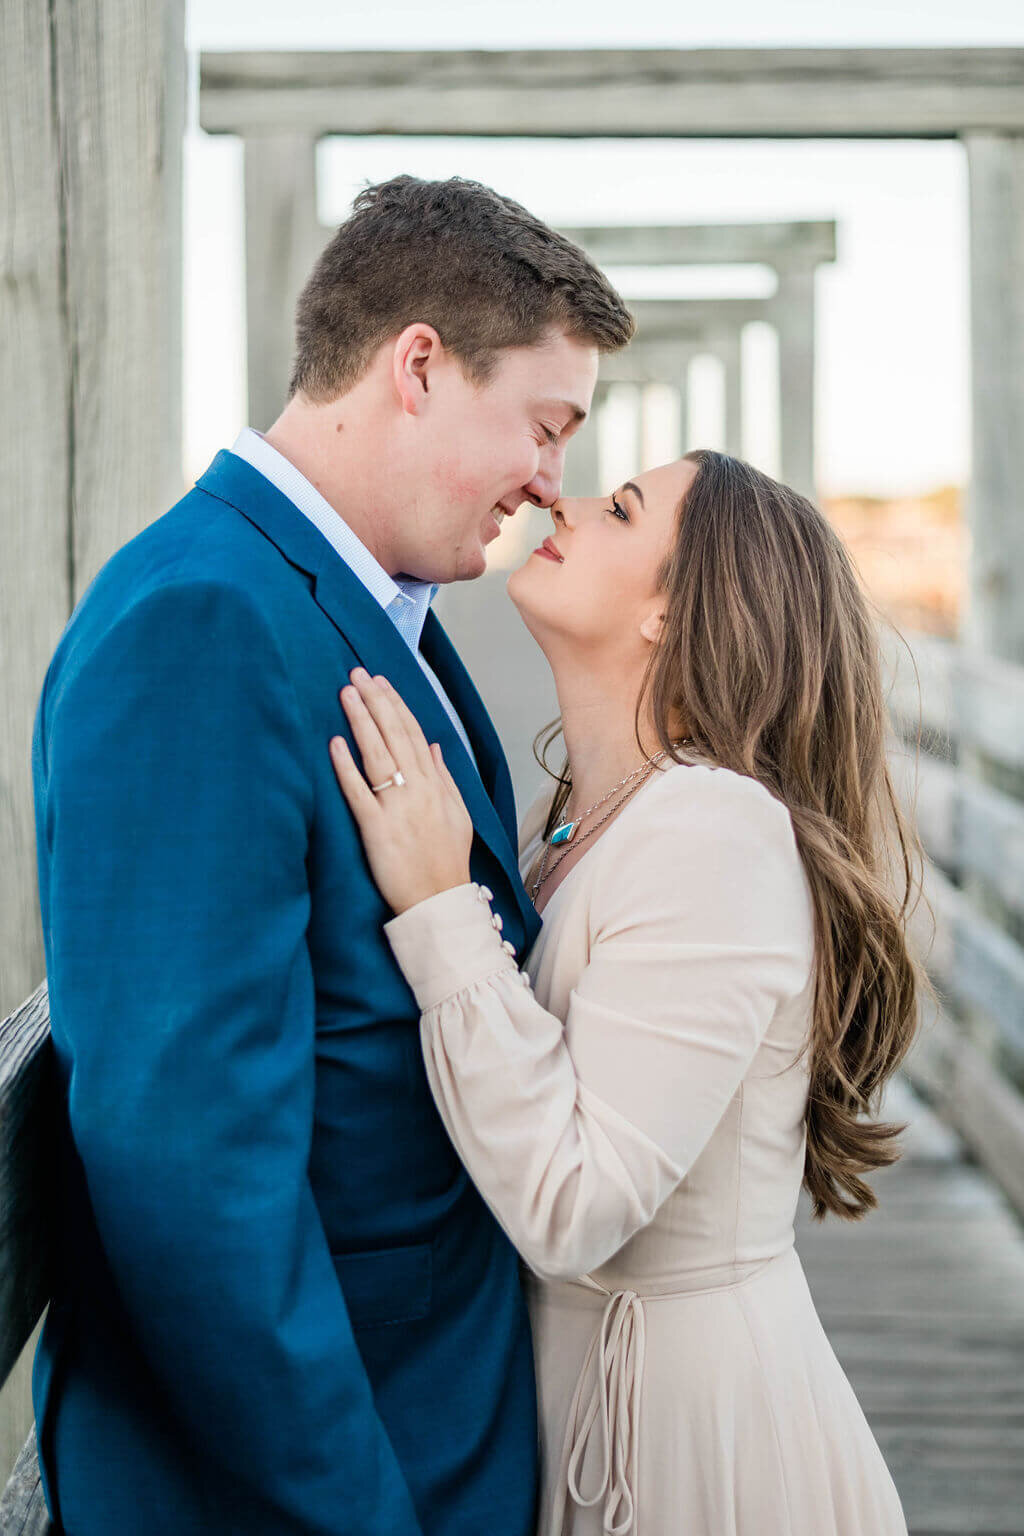 Alexia & Read’s Engagement Session in Dallas, Texas